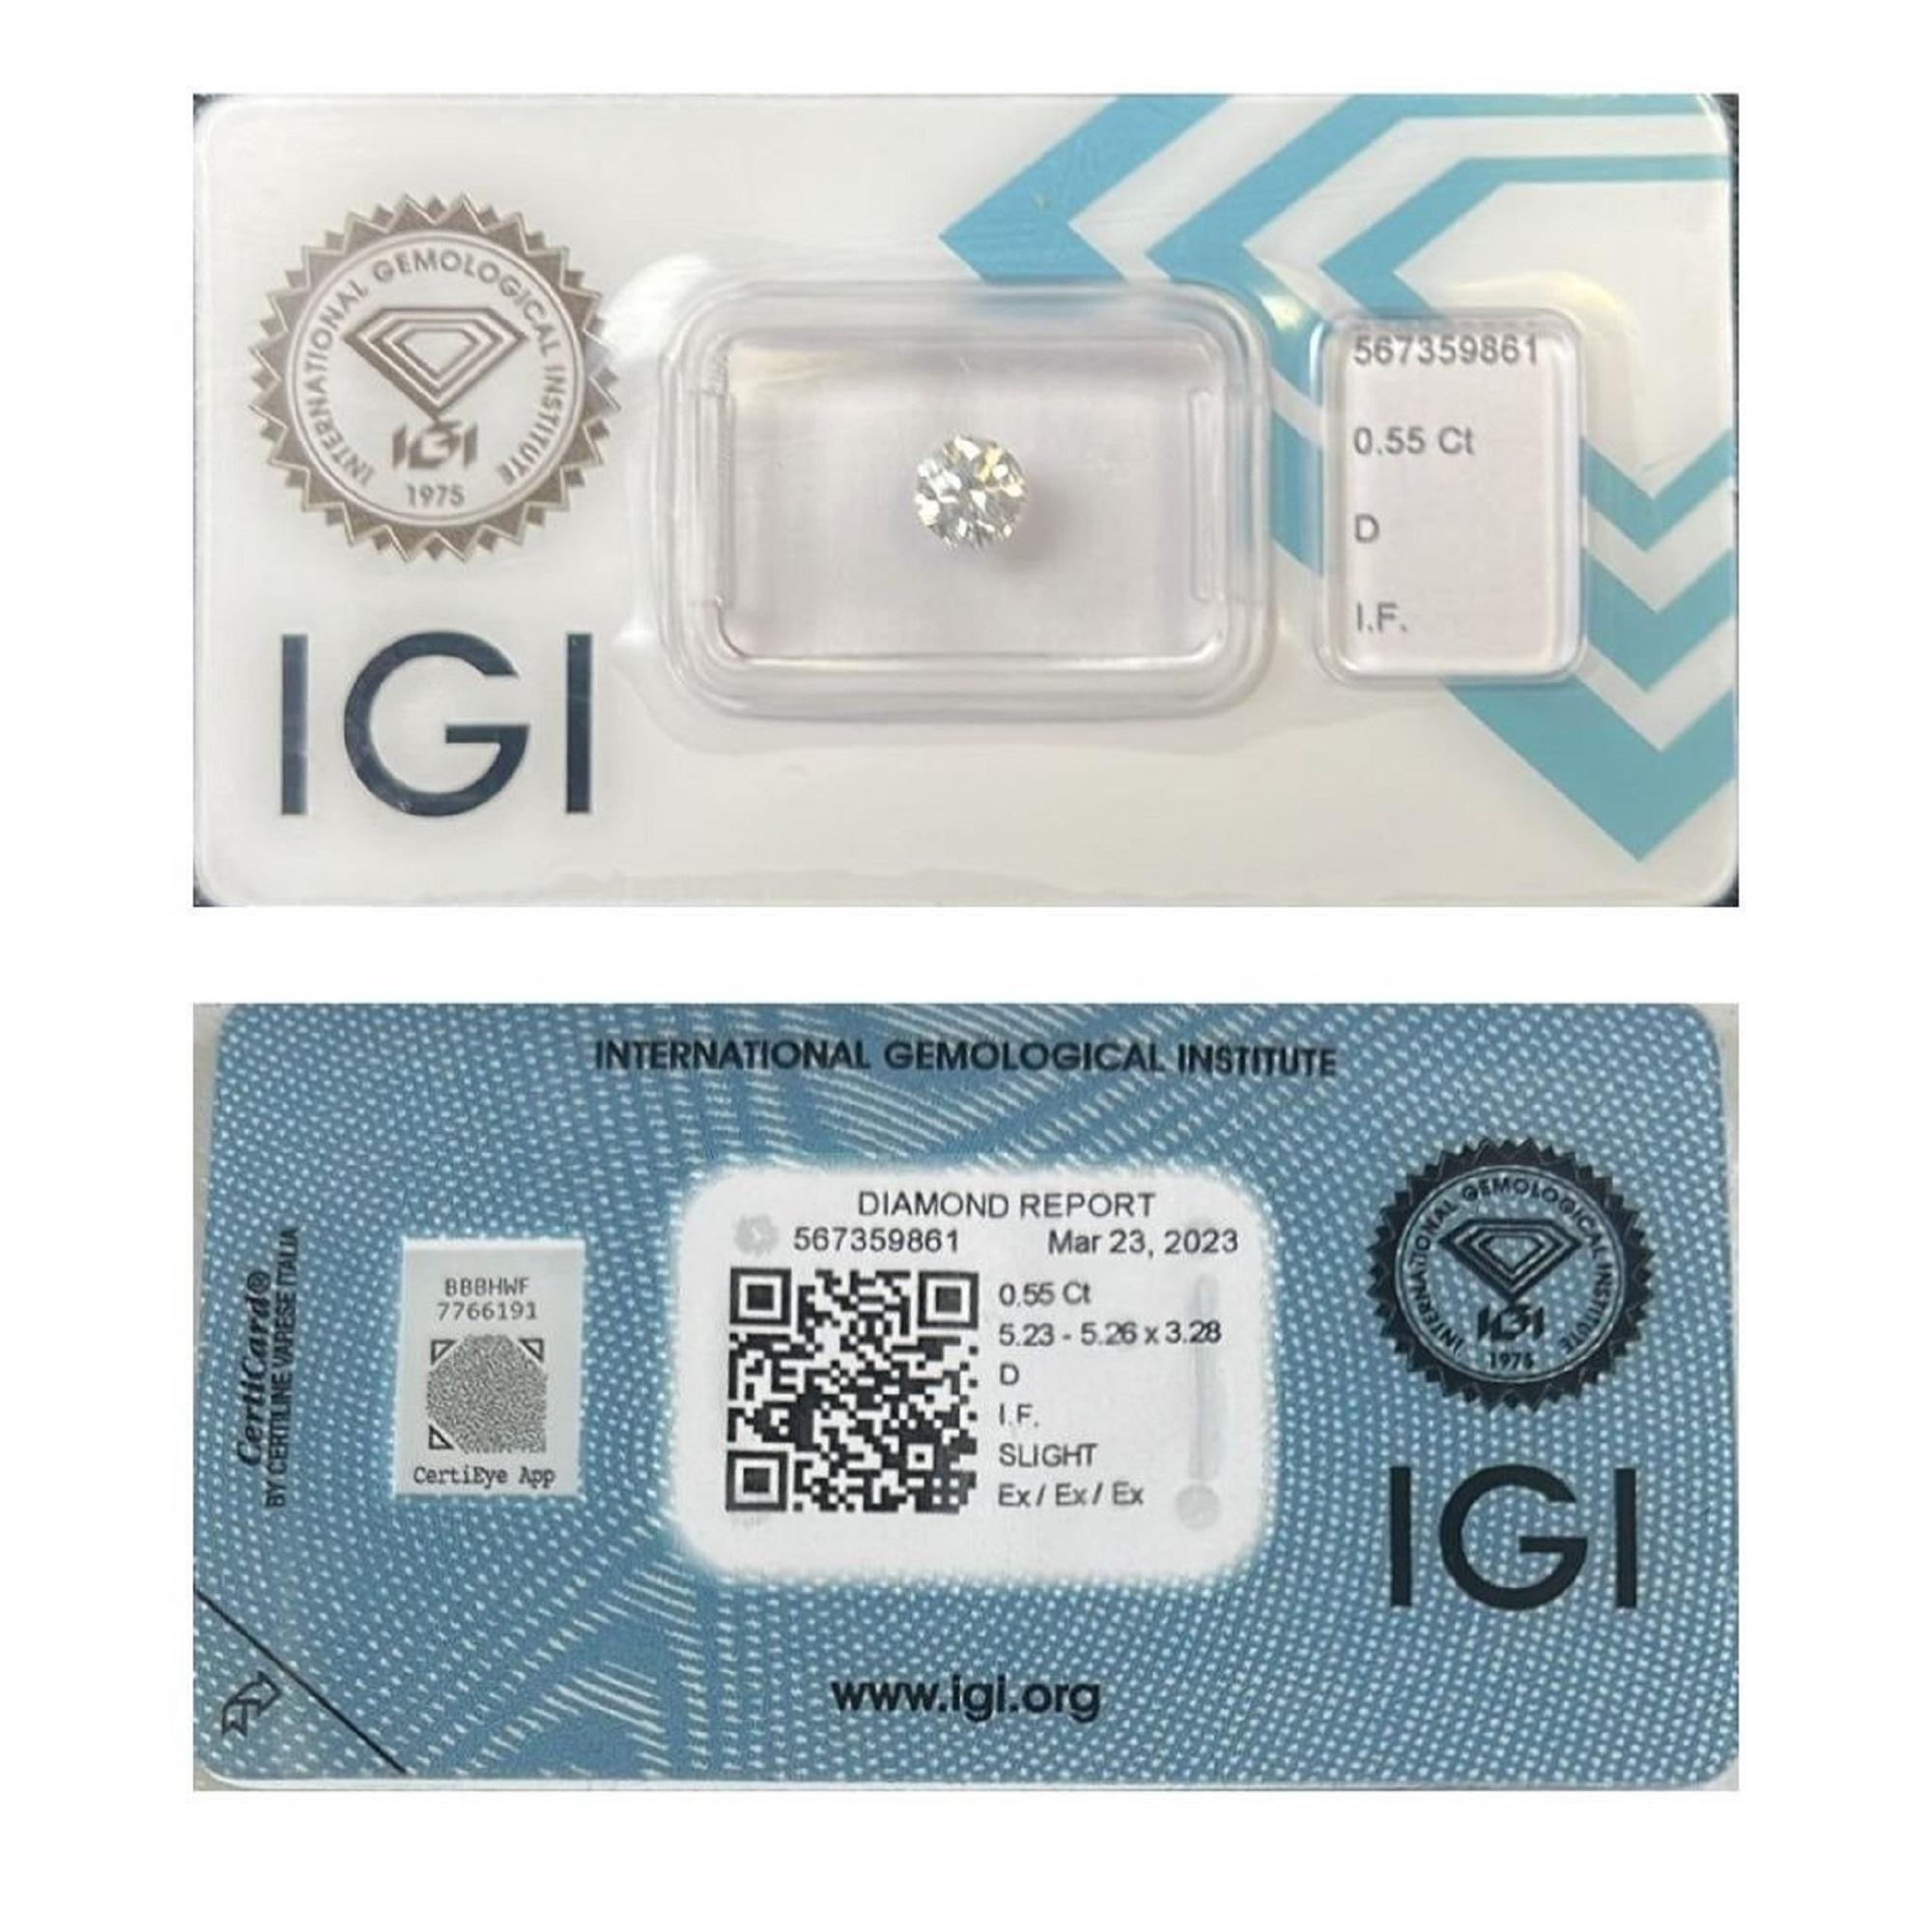 Sparkling 1pc Natural Diamond w/ 0.55 ct Round D IF IGI Certificate For Sale 2